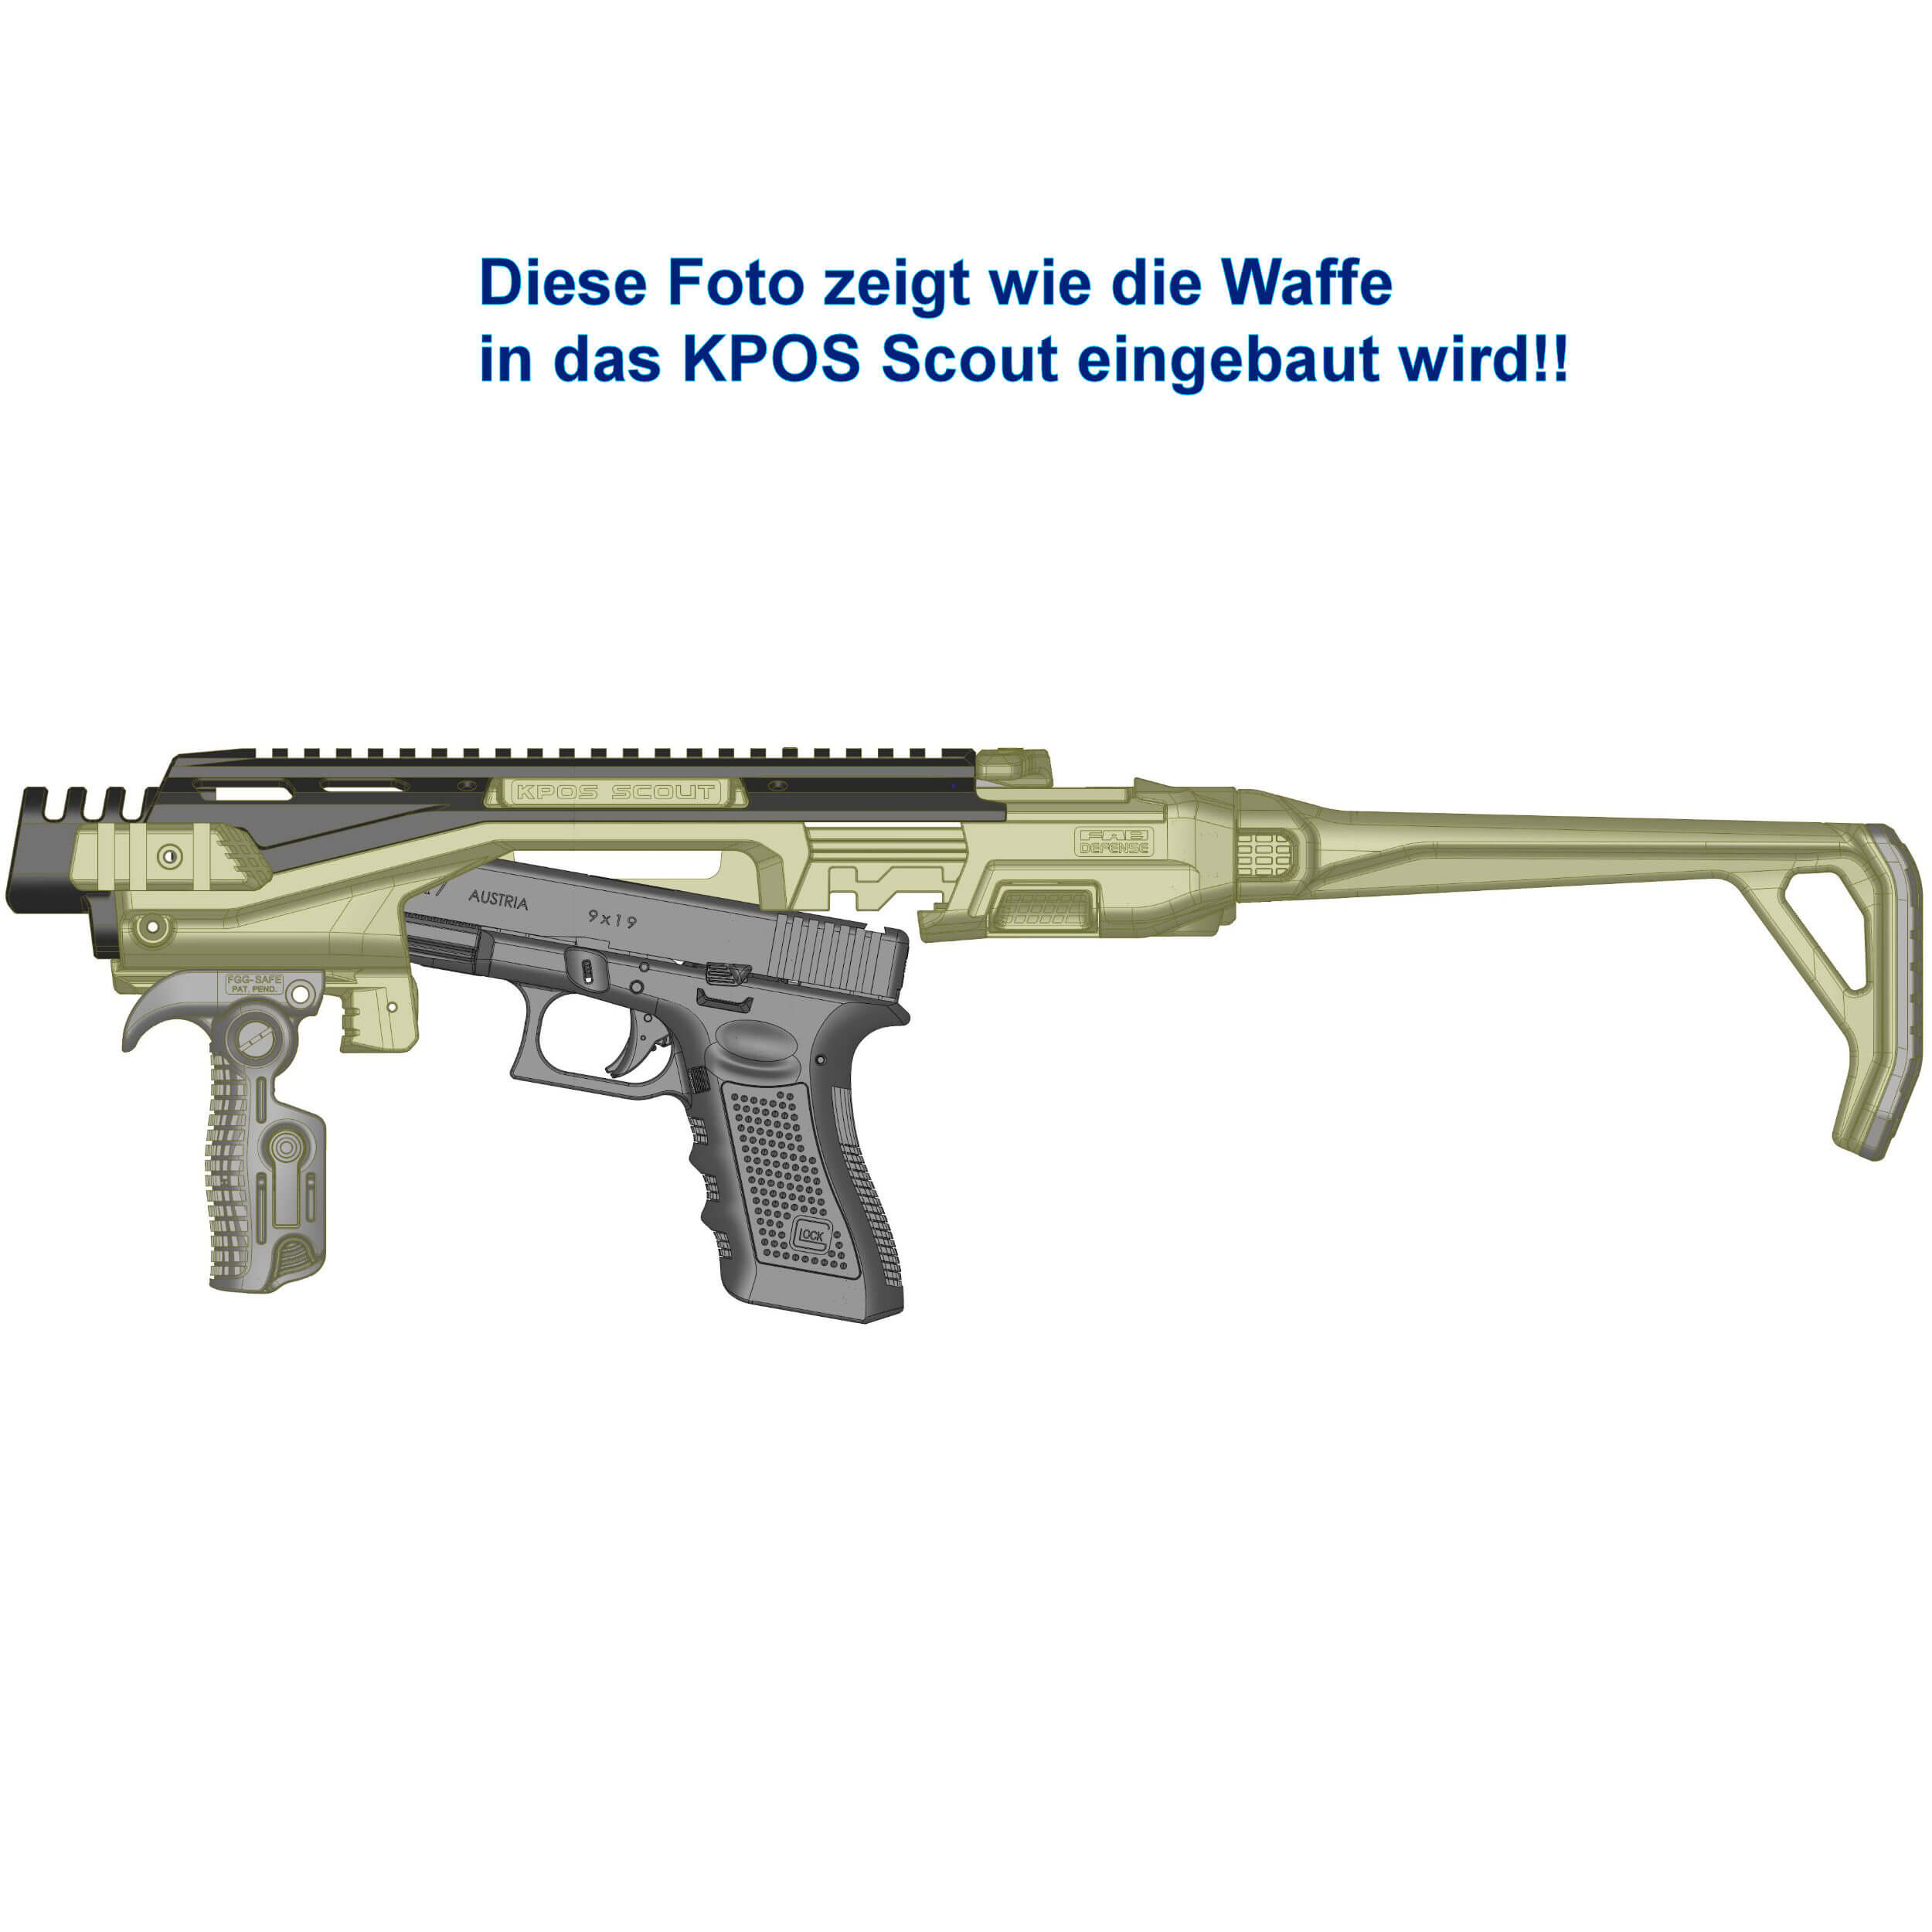 KPOS Scout STANDARD PDW